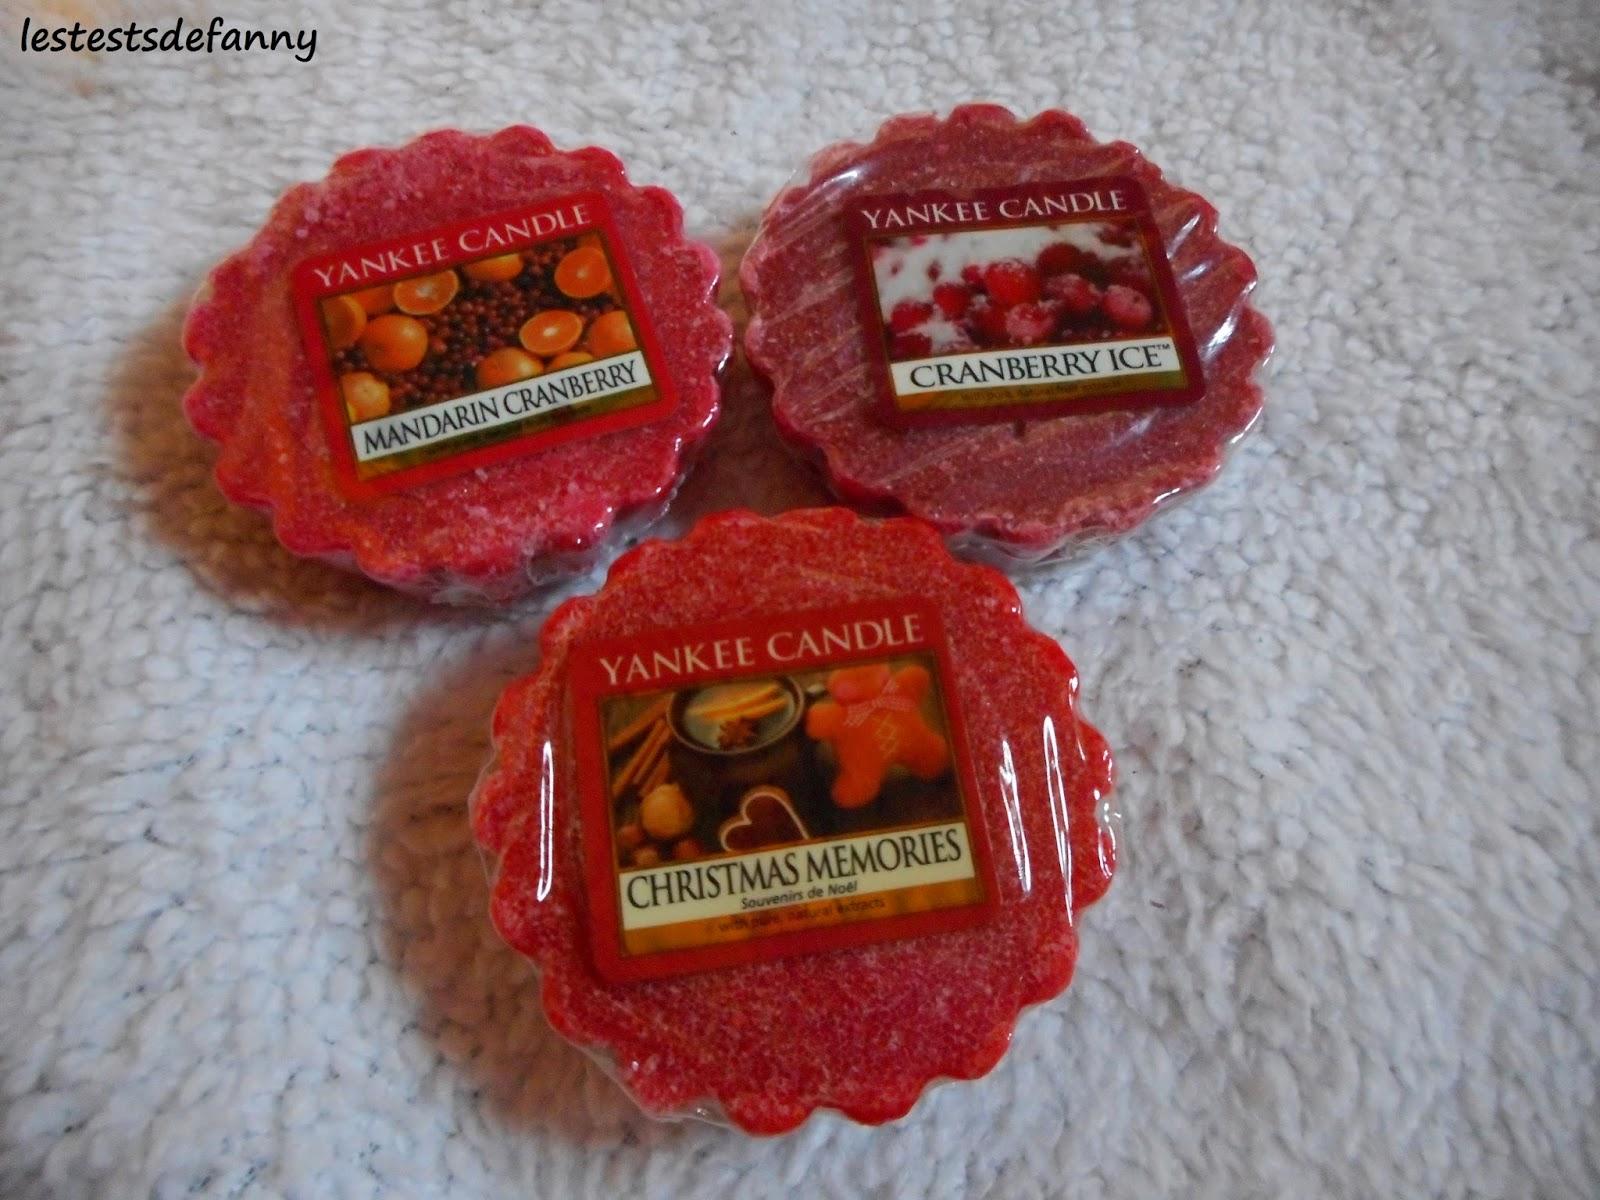 Second haul Yankee Candles